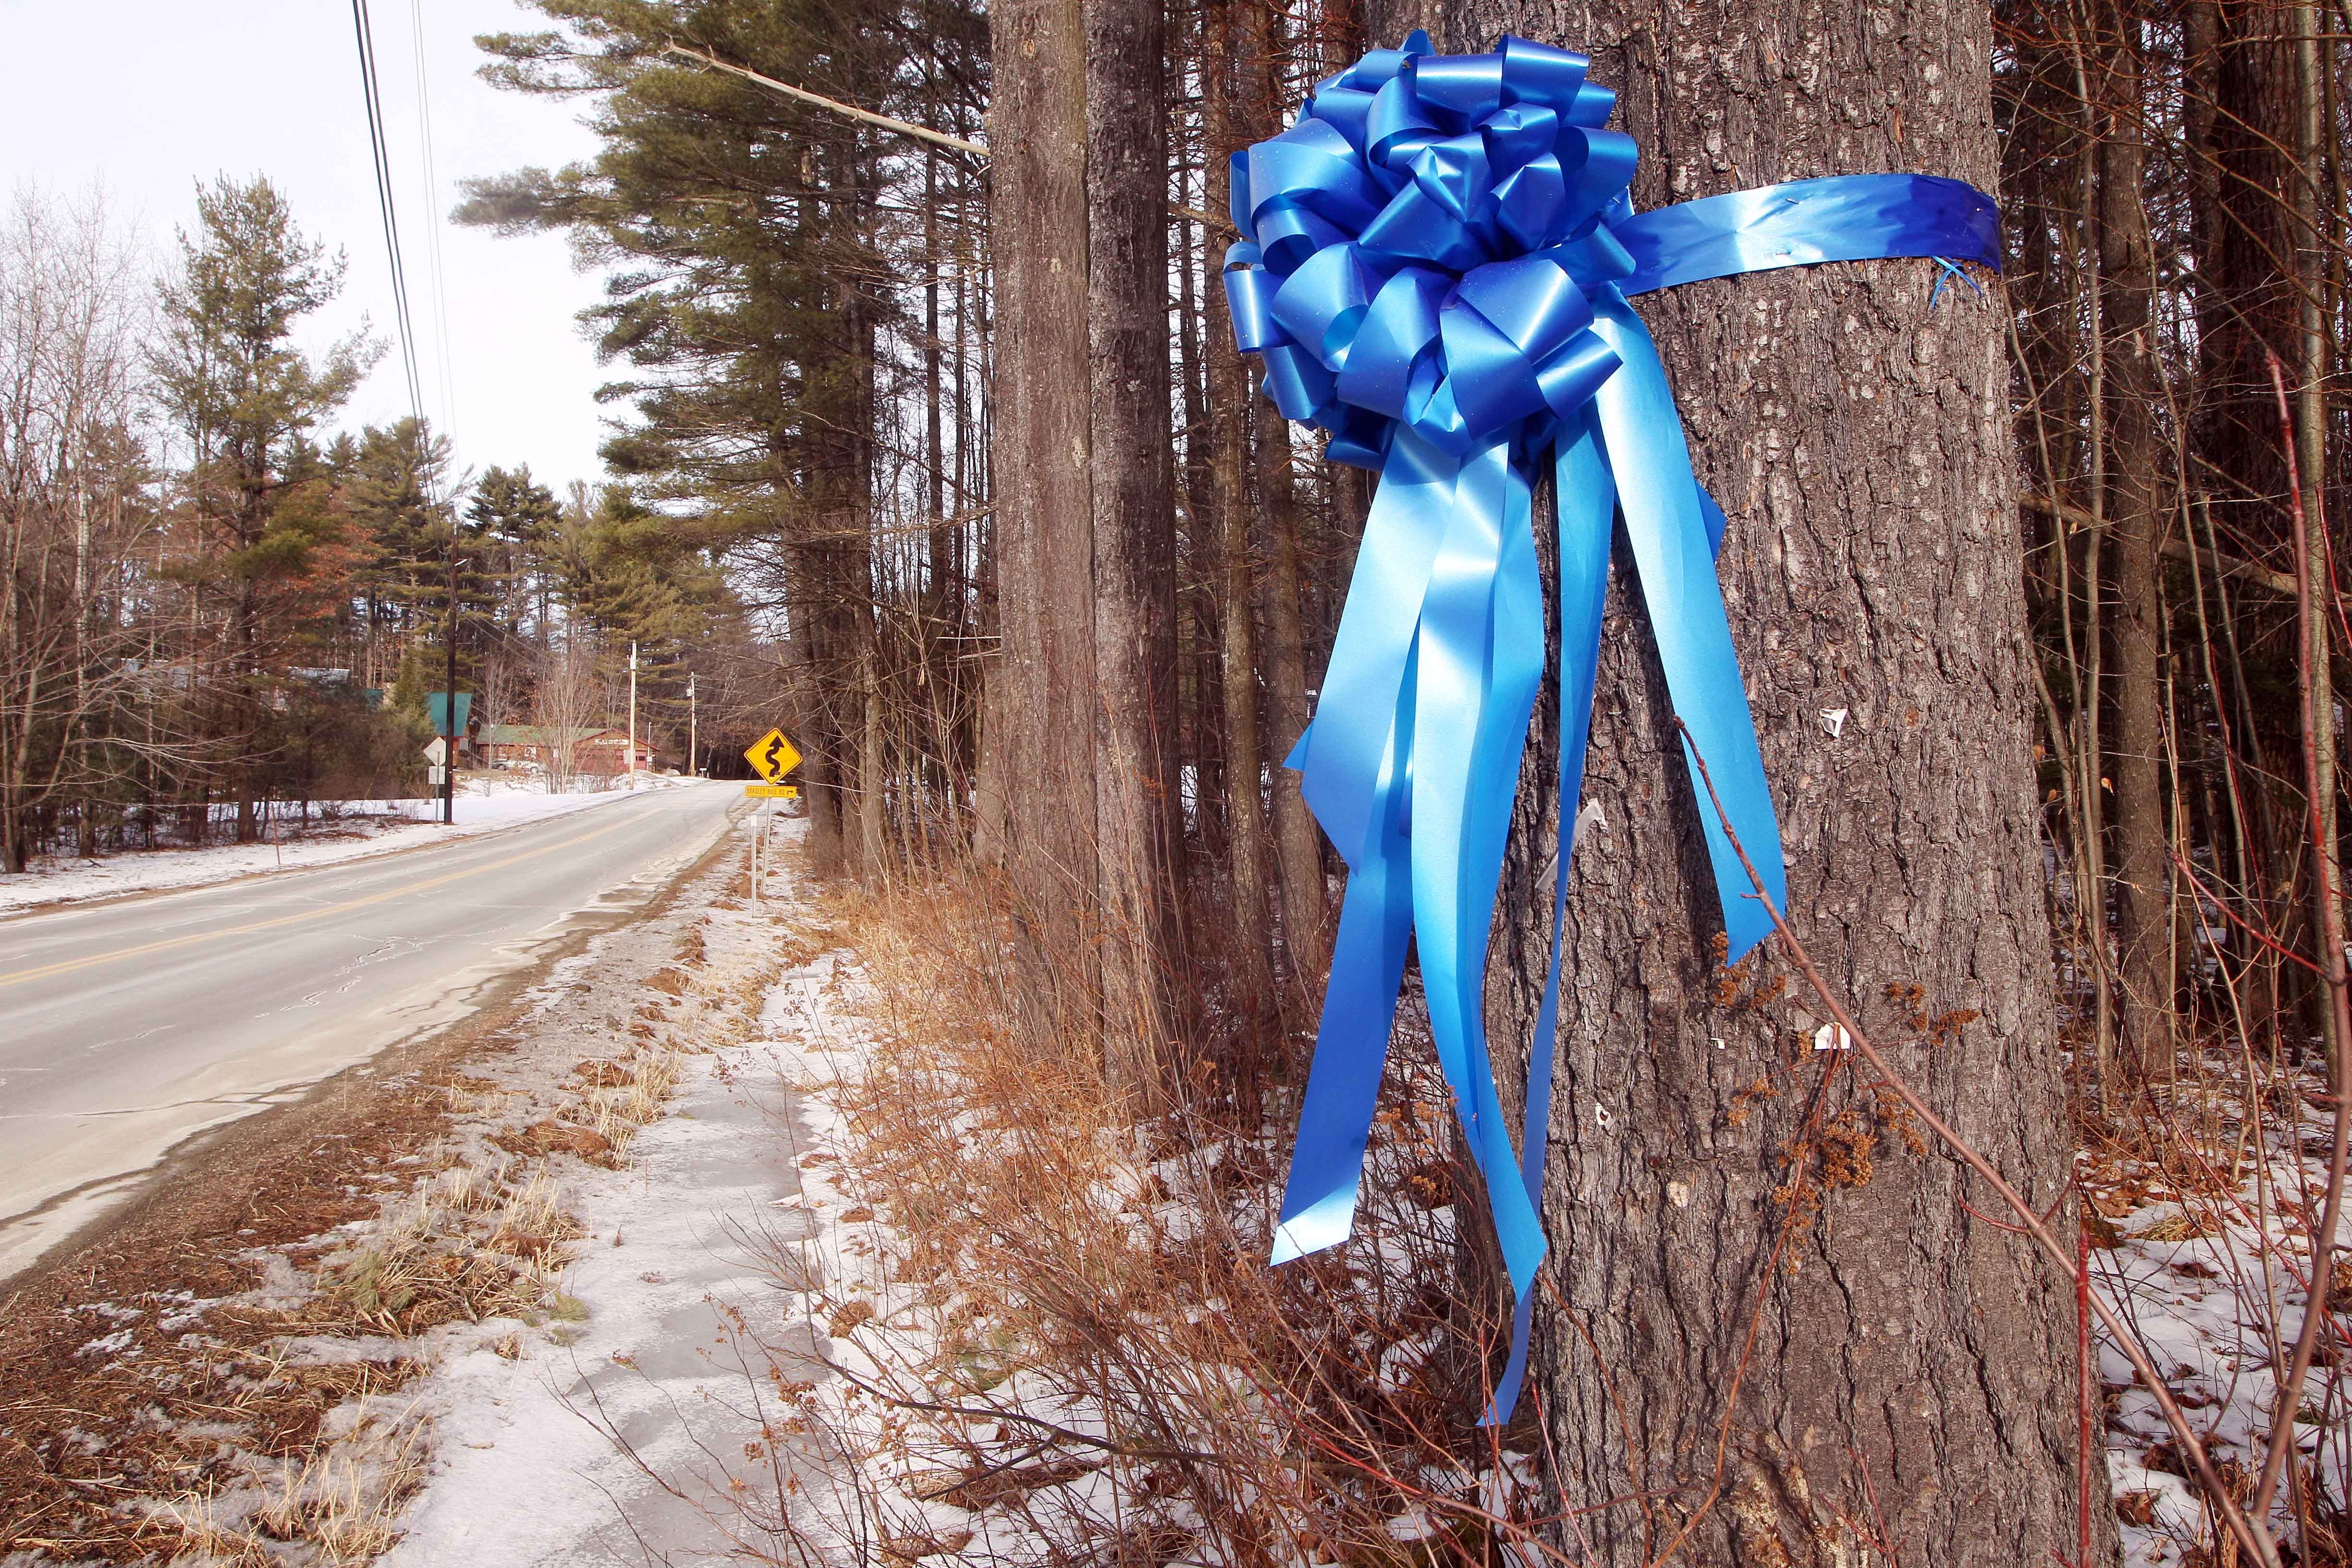 A ribbon hangs at the site where Murray was last seen after a car crash in rural New Hampshire